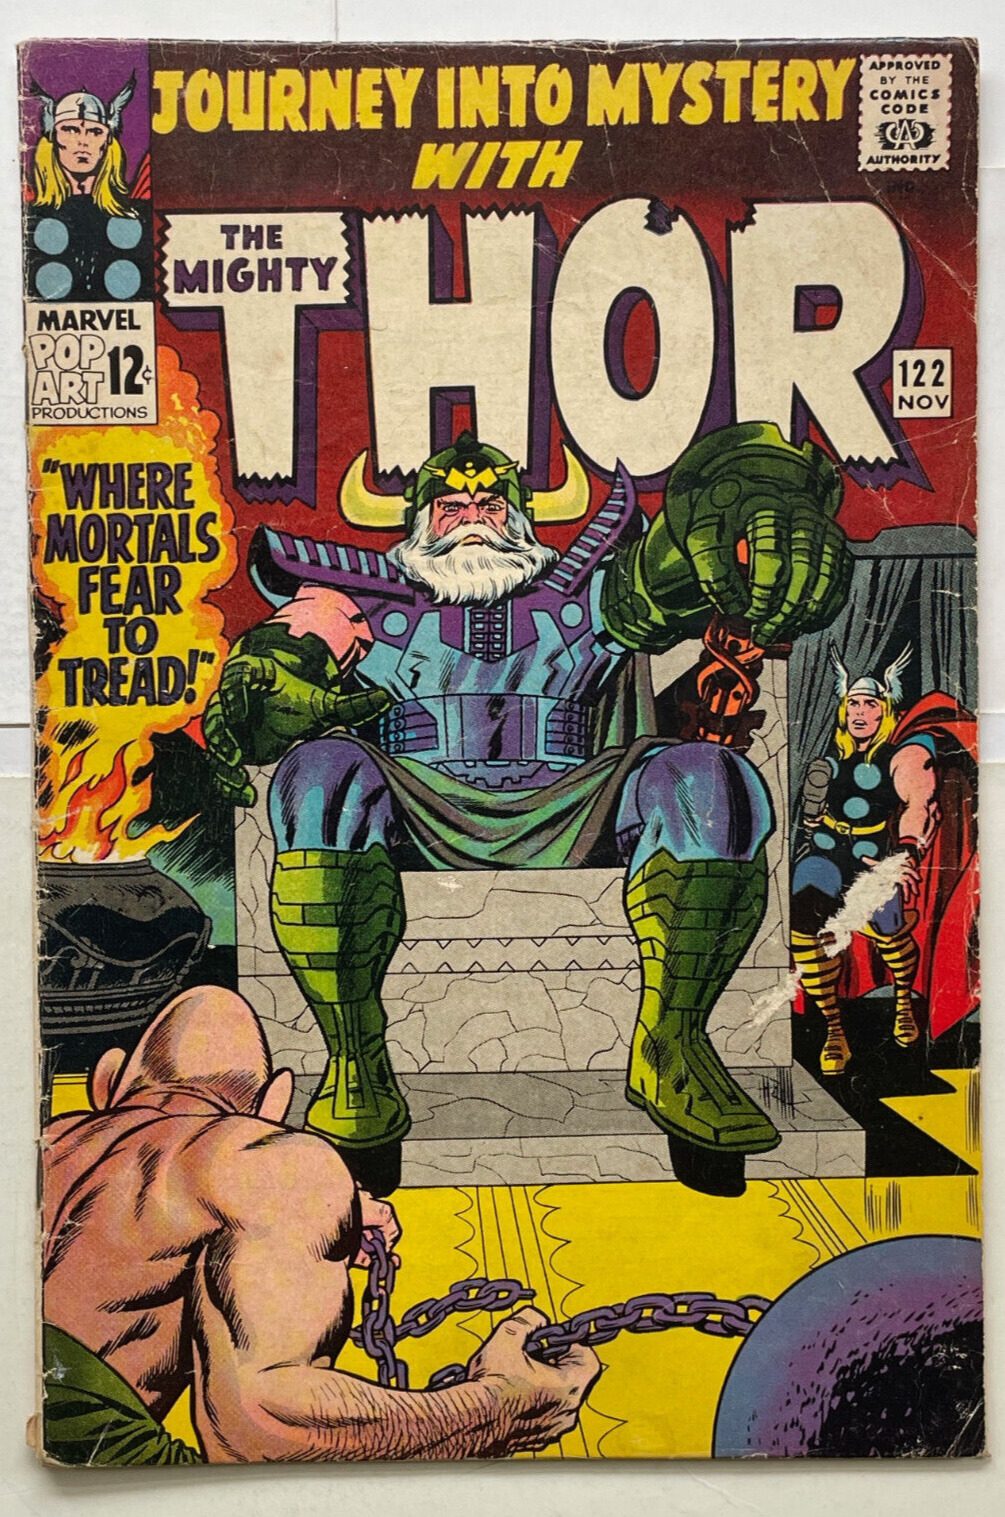 Journey Into Mystery with the Mighty Thor #122 -MARVEL COMICS -1965